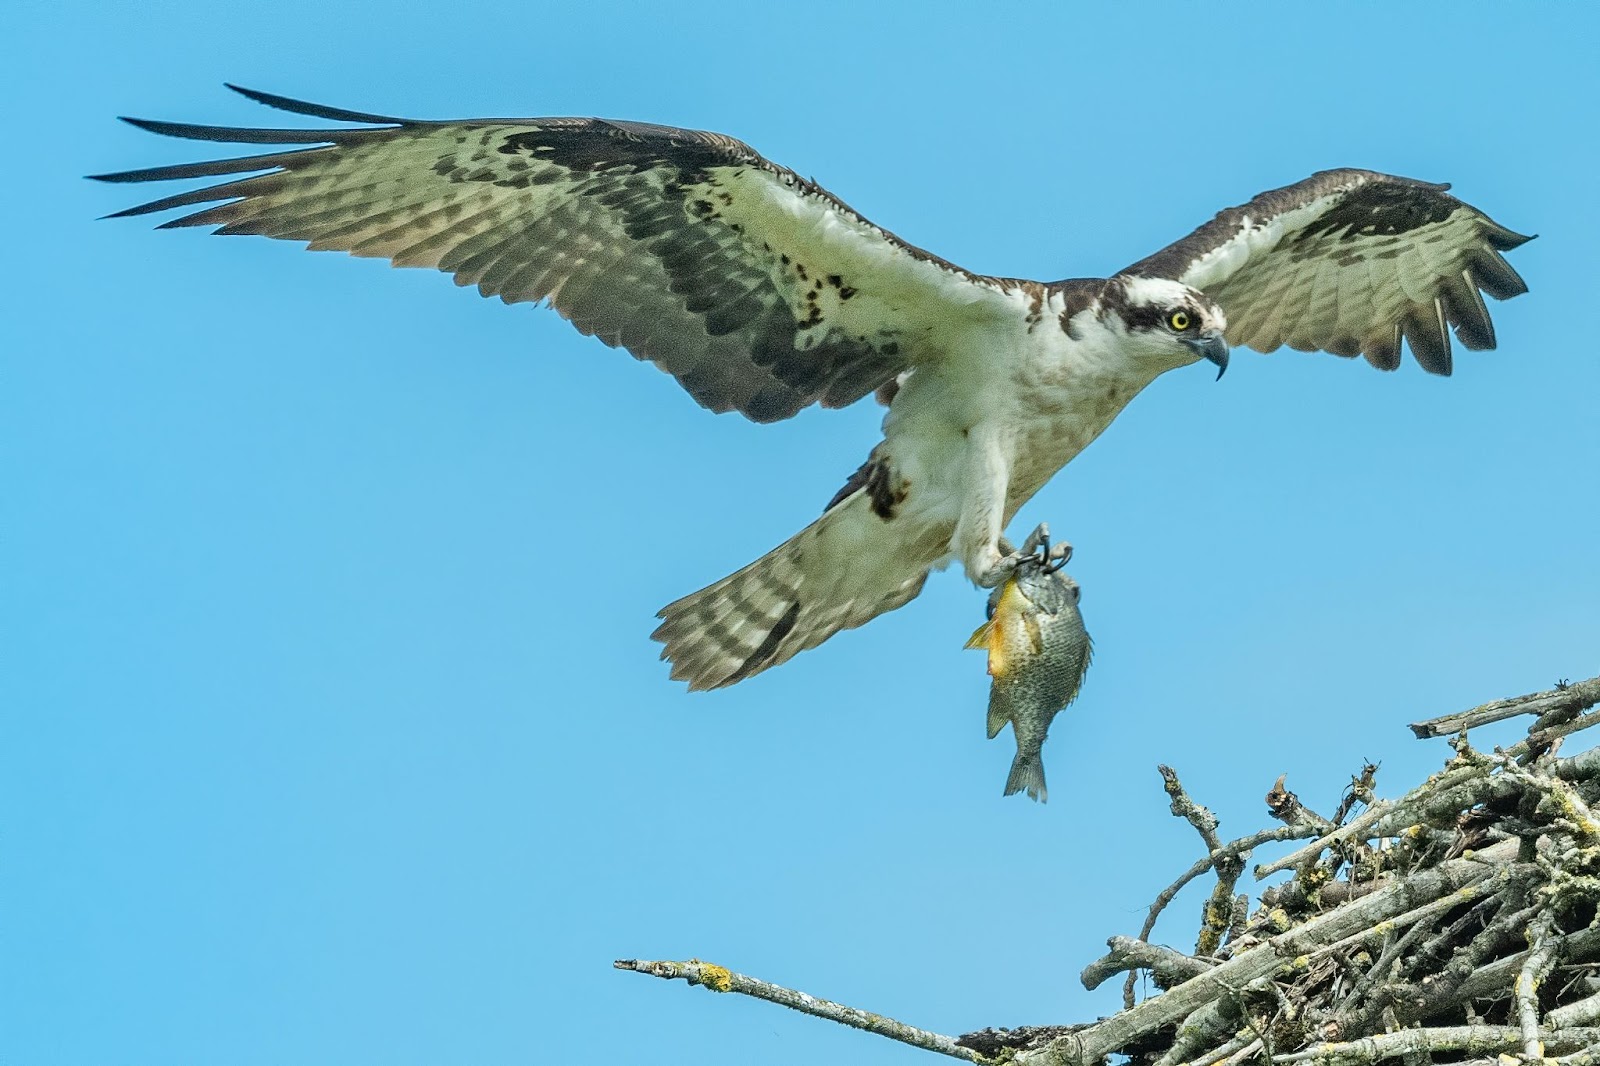 an osprey carrying a fish into a nest, against a blue sky